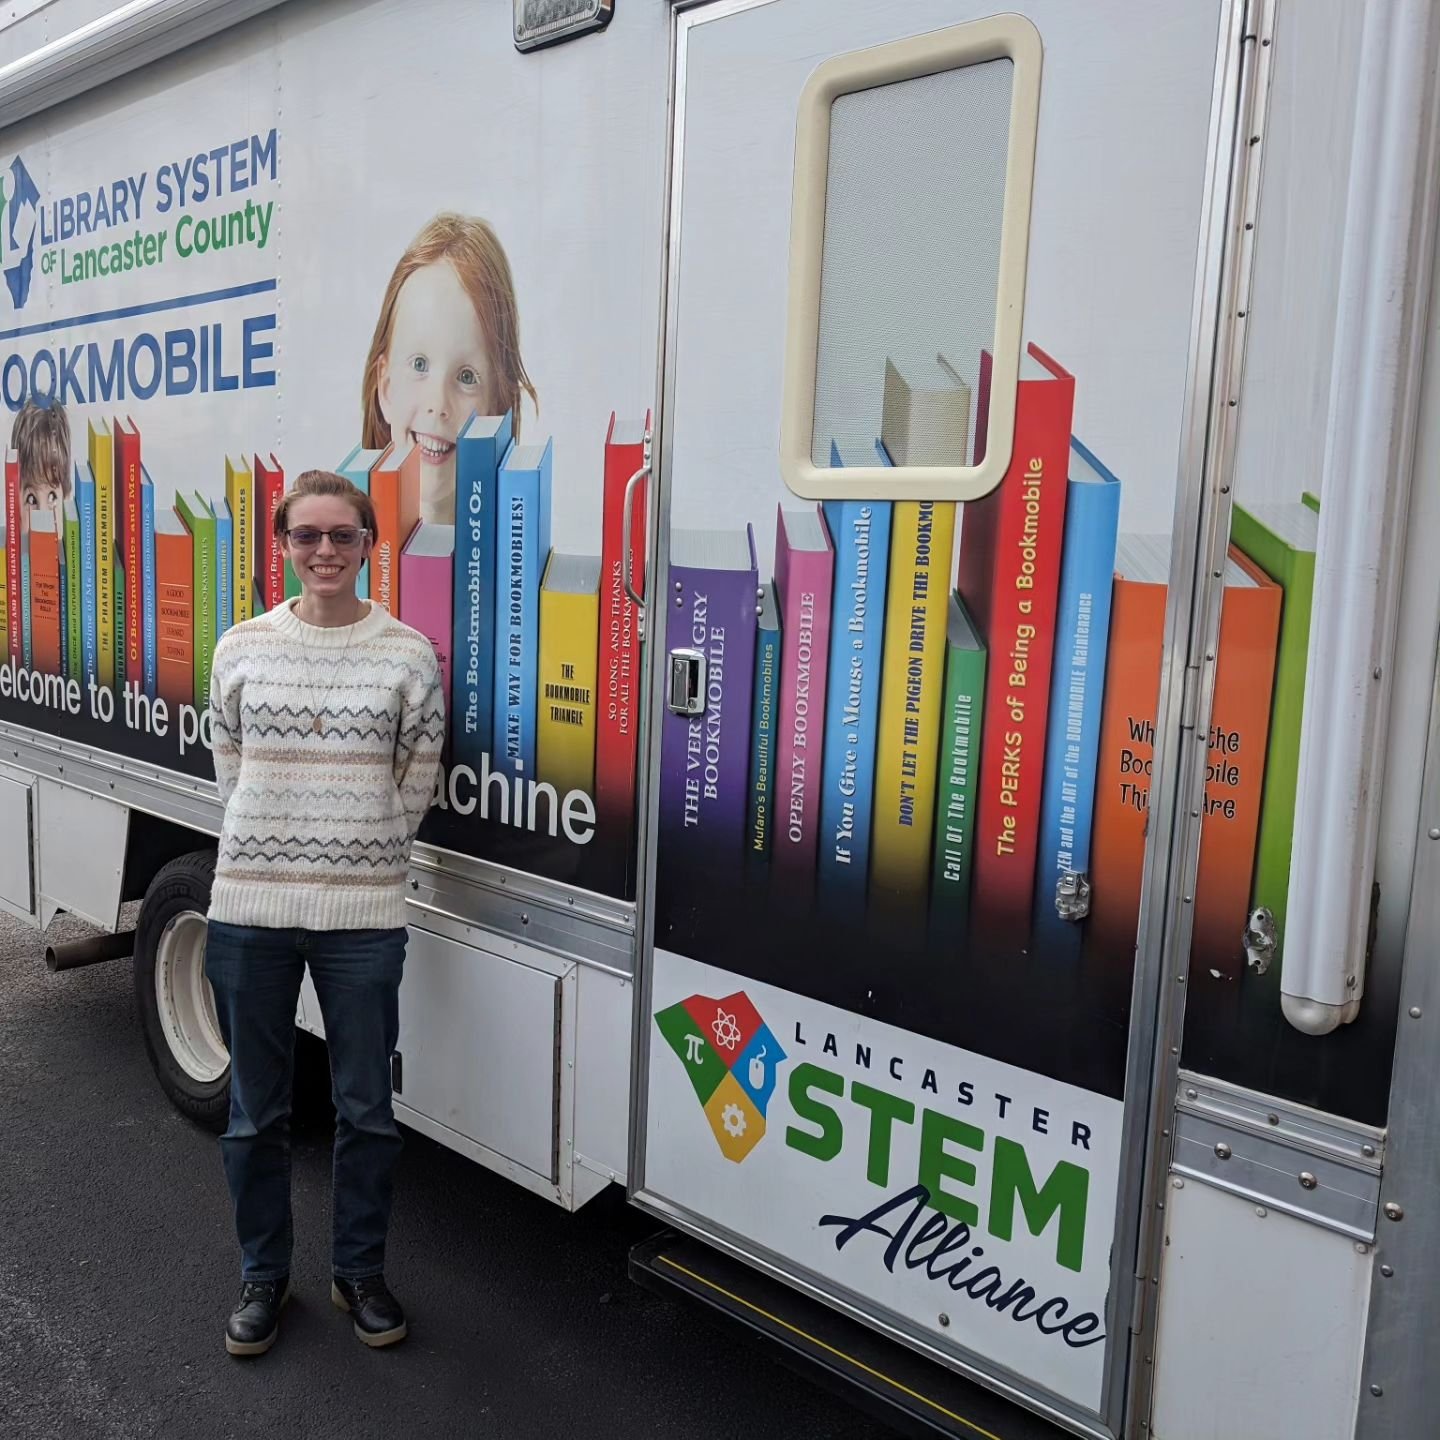 Sara Poiry&rsquo;s Shalom Project service placement is with the Library System of Lancaster County&rsquo;s Bookmobile!

Sara&rsquo;s supervisor, Audrey Lilley, says,&nbsp;&nbsp;&quot;Sara's combination of attention to detail and creative ability make